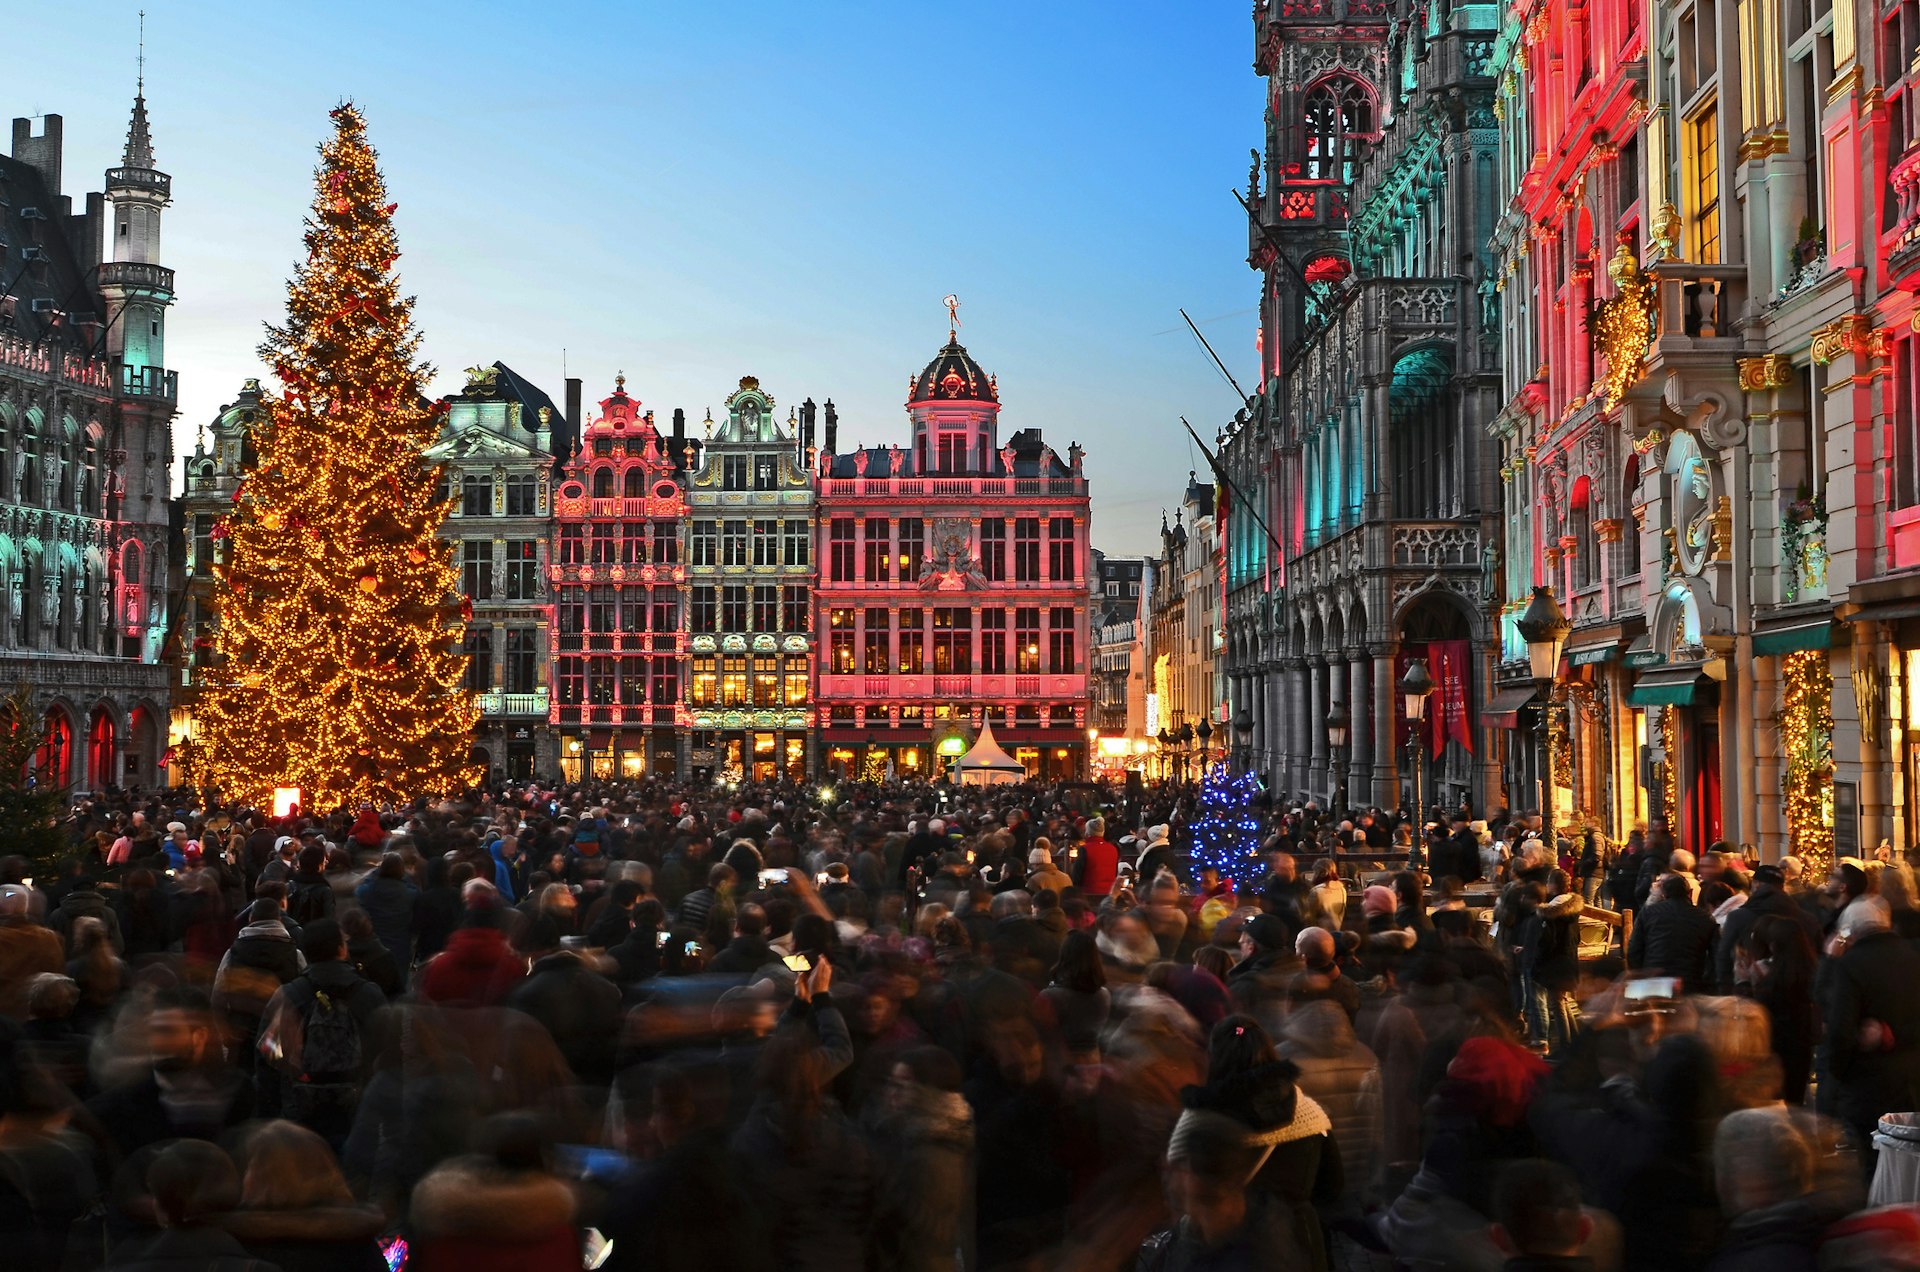 The iconic "Grand Place" (literally "Big Square") in the centre of Brussels, at Christmas